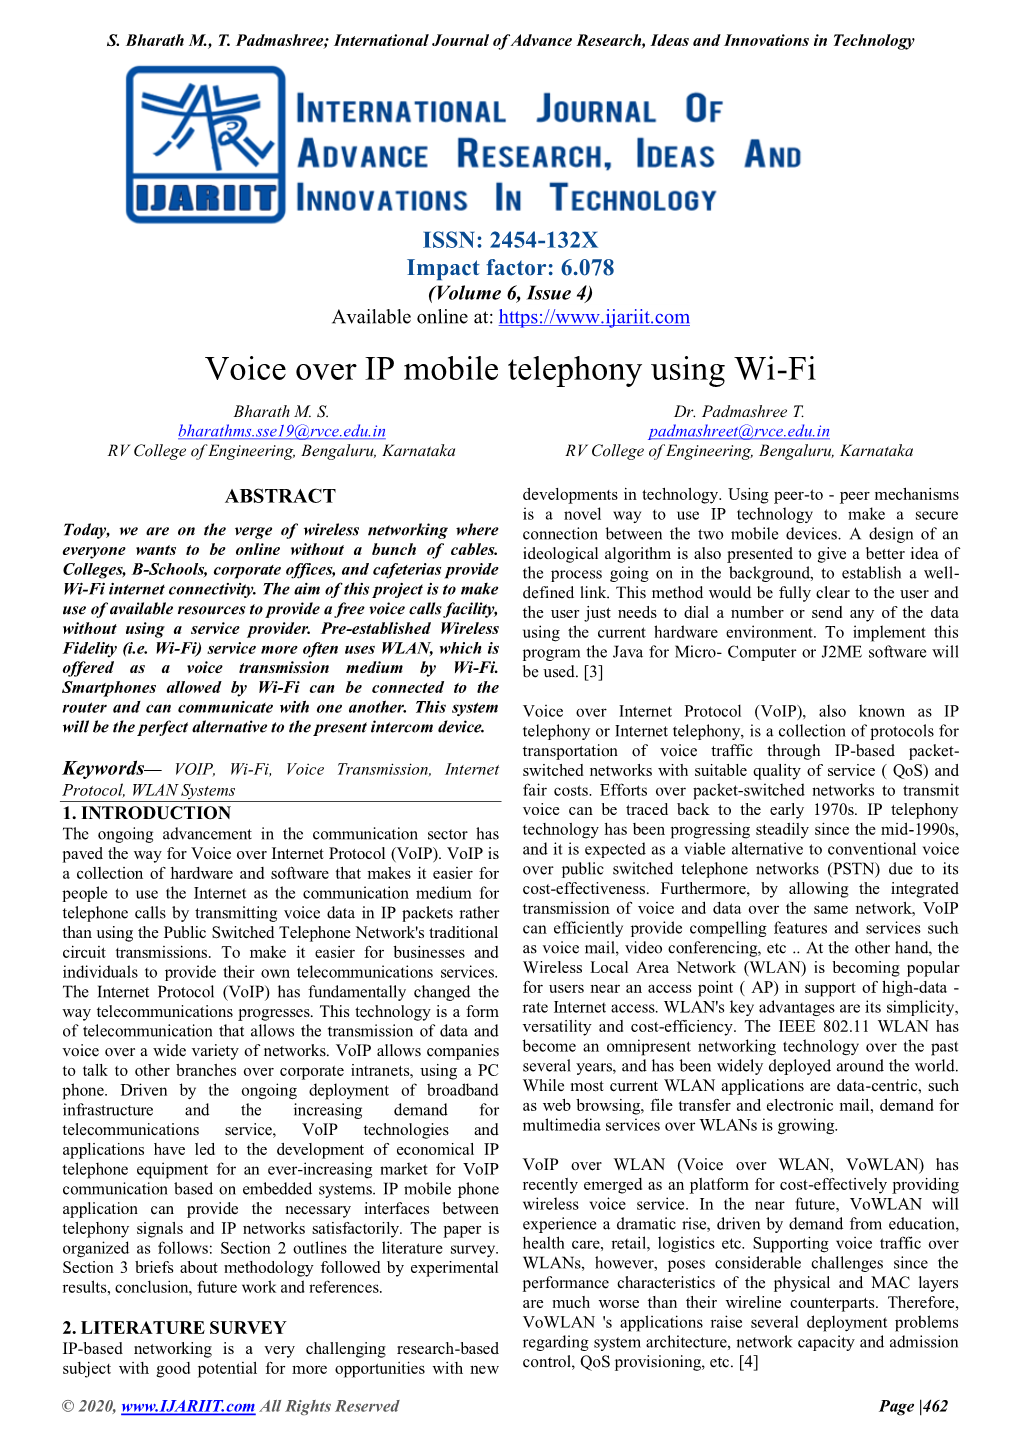 Voice Over IP Mobile Telephony Using Wi-Fi